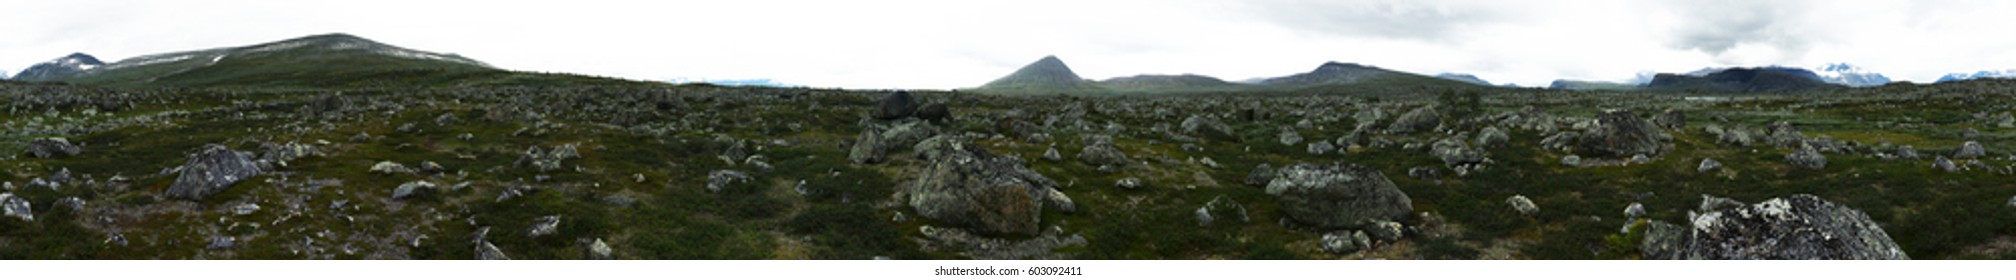 360 degree panorama of bush landscape with rocks spread out across it in Sarek National Park, Sweden - Shutterstock ID 603092411